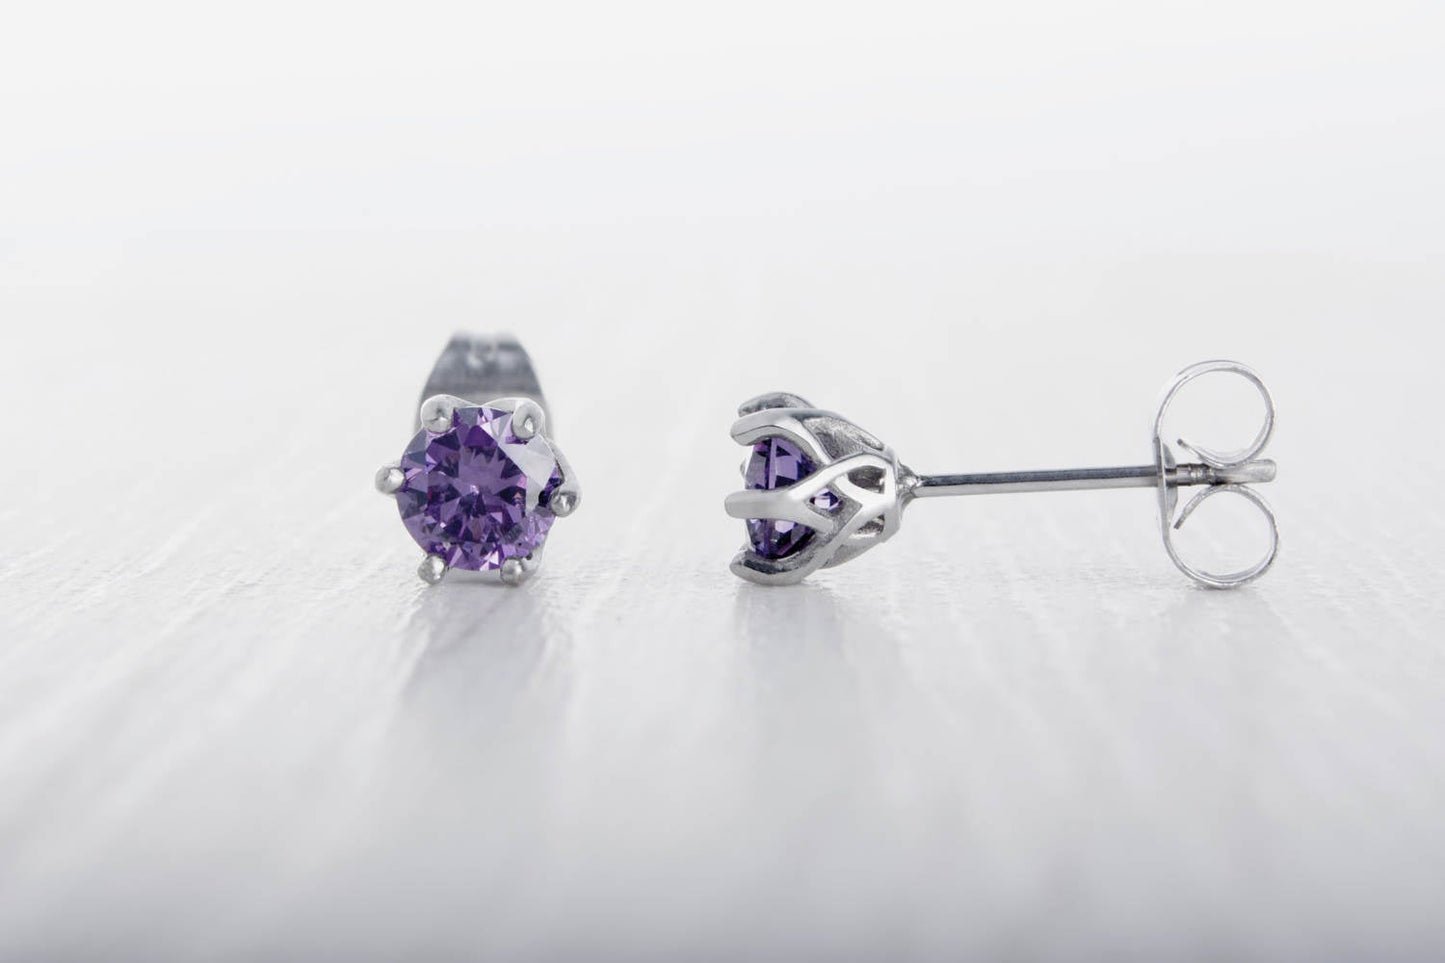 Natural Amethyst stud earrings, available in titanium, white gold and surgical steel 4mm amd 5mm sizes